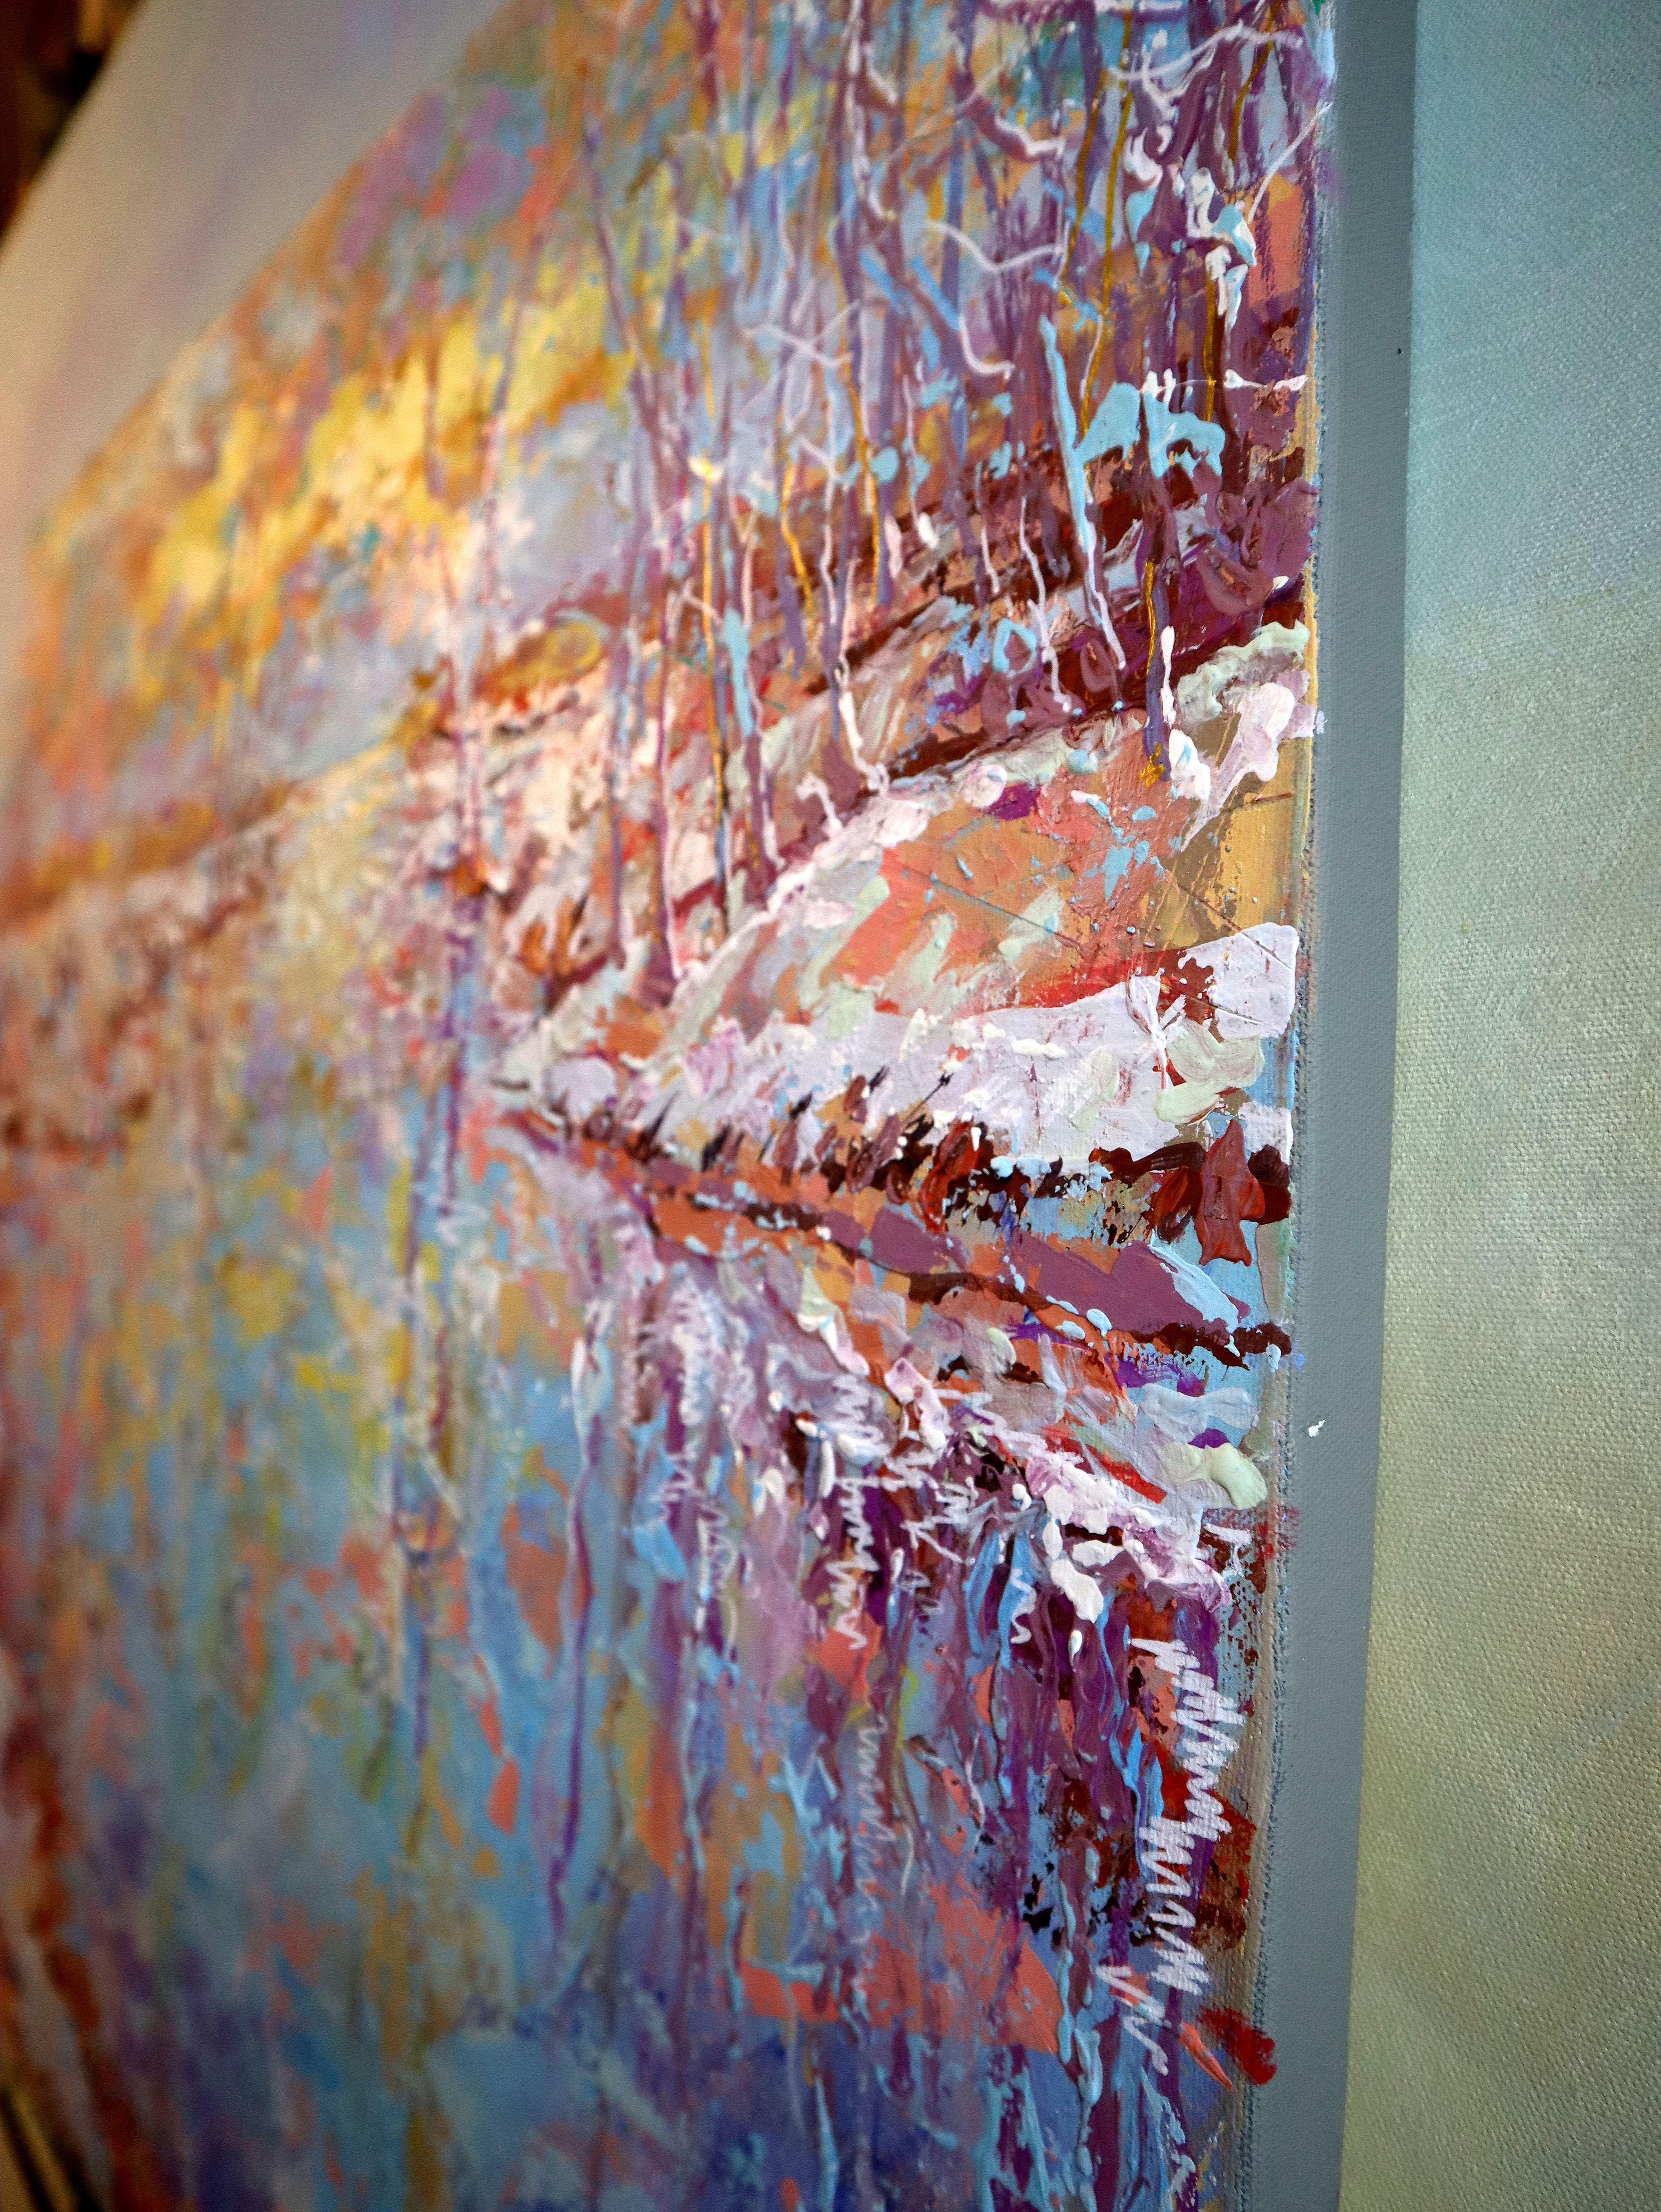 In this canvas, I layered acrylics and oils to capture the transformative energy of nature as it embraces winter. My brushstrokes dance with color, inviting impressionistic glimpses into the serene yet vibrant chill of the season's arrival. It's an